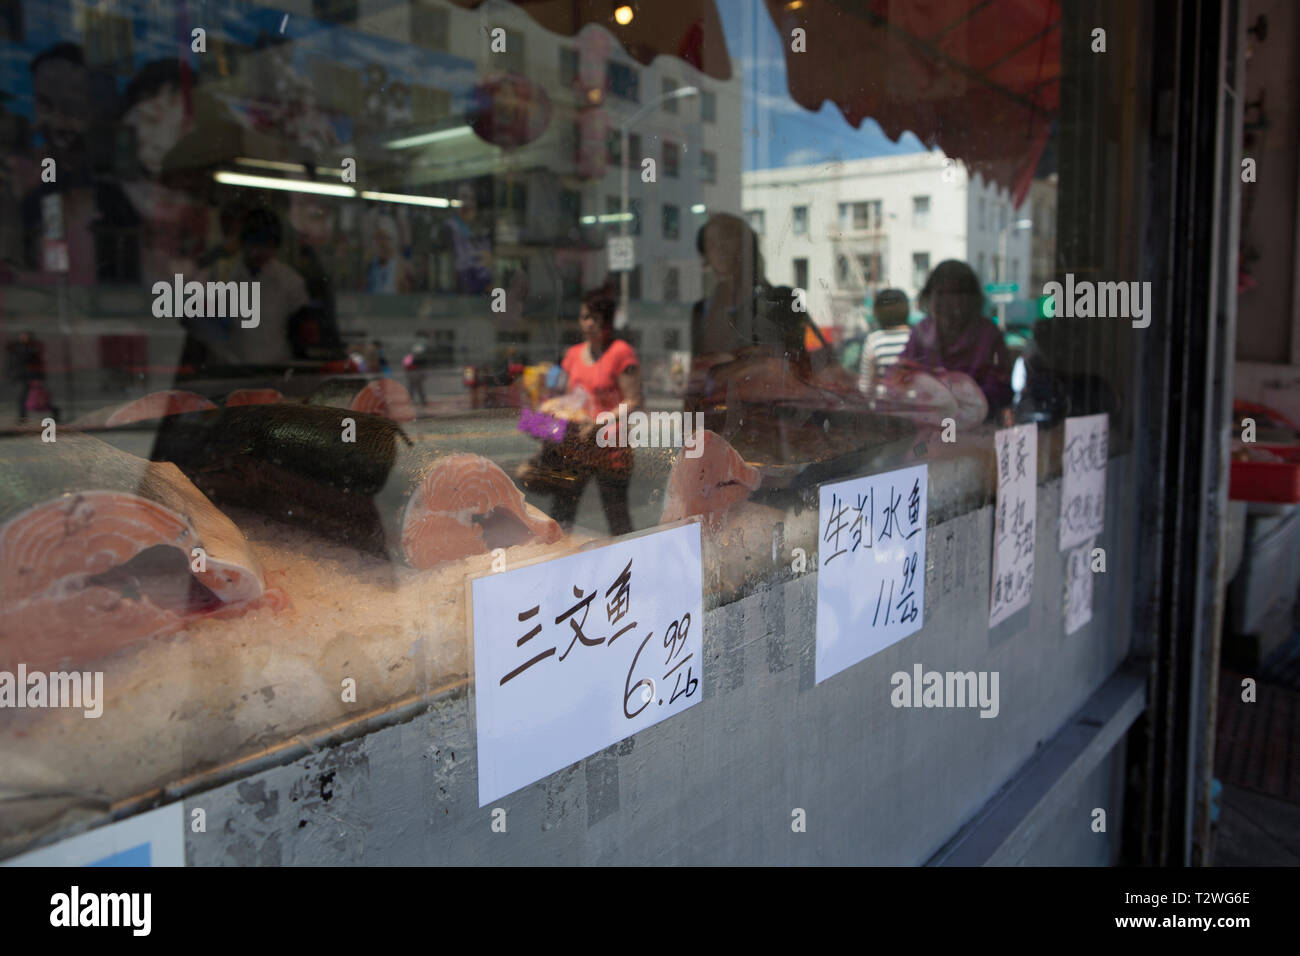 Fish for sale in Chinatown San Francisco Stock Photo